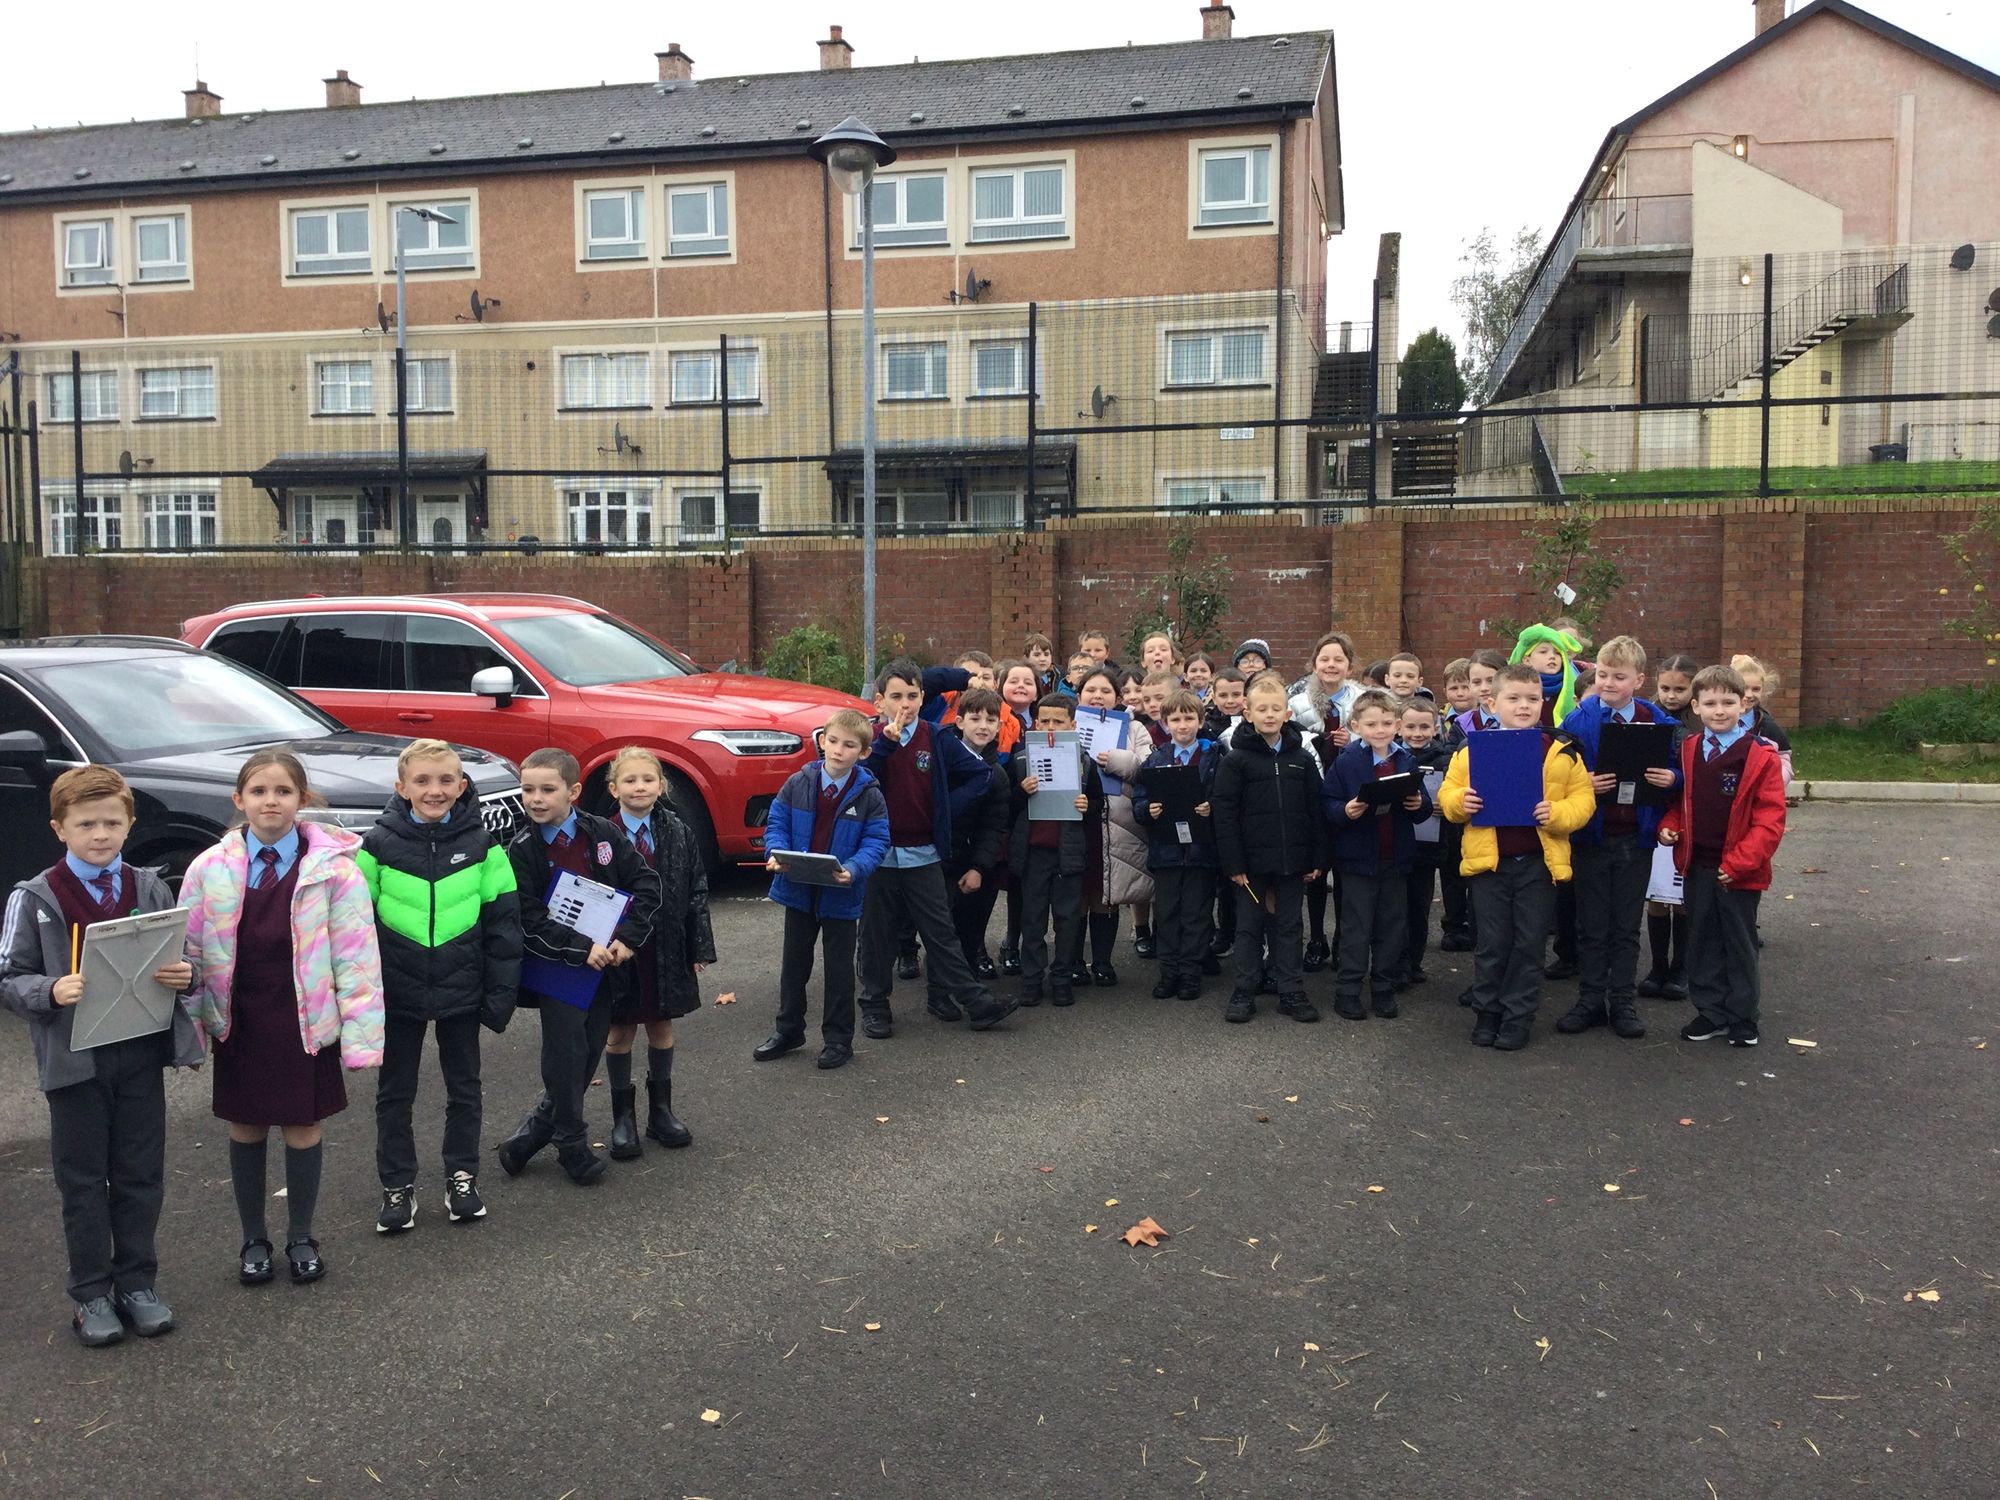 Year 4C had a great afternoon working in pairs to complete our traffic survey.